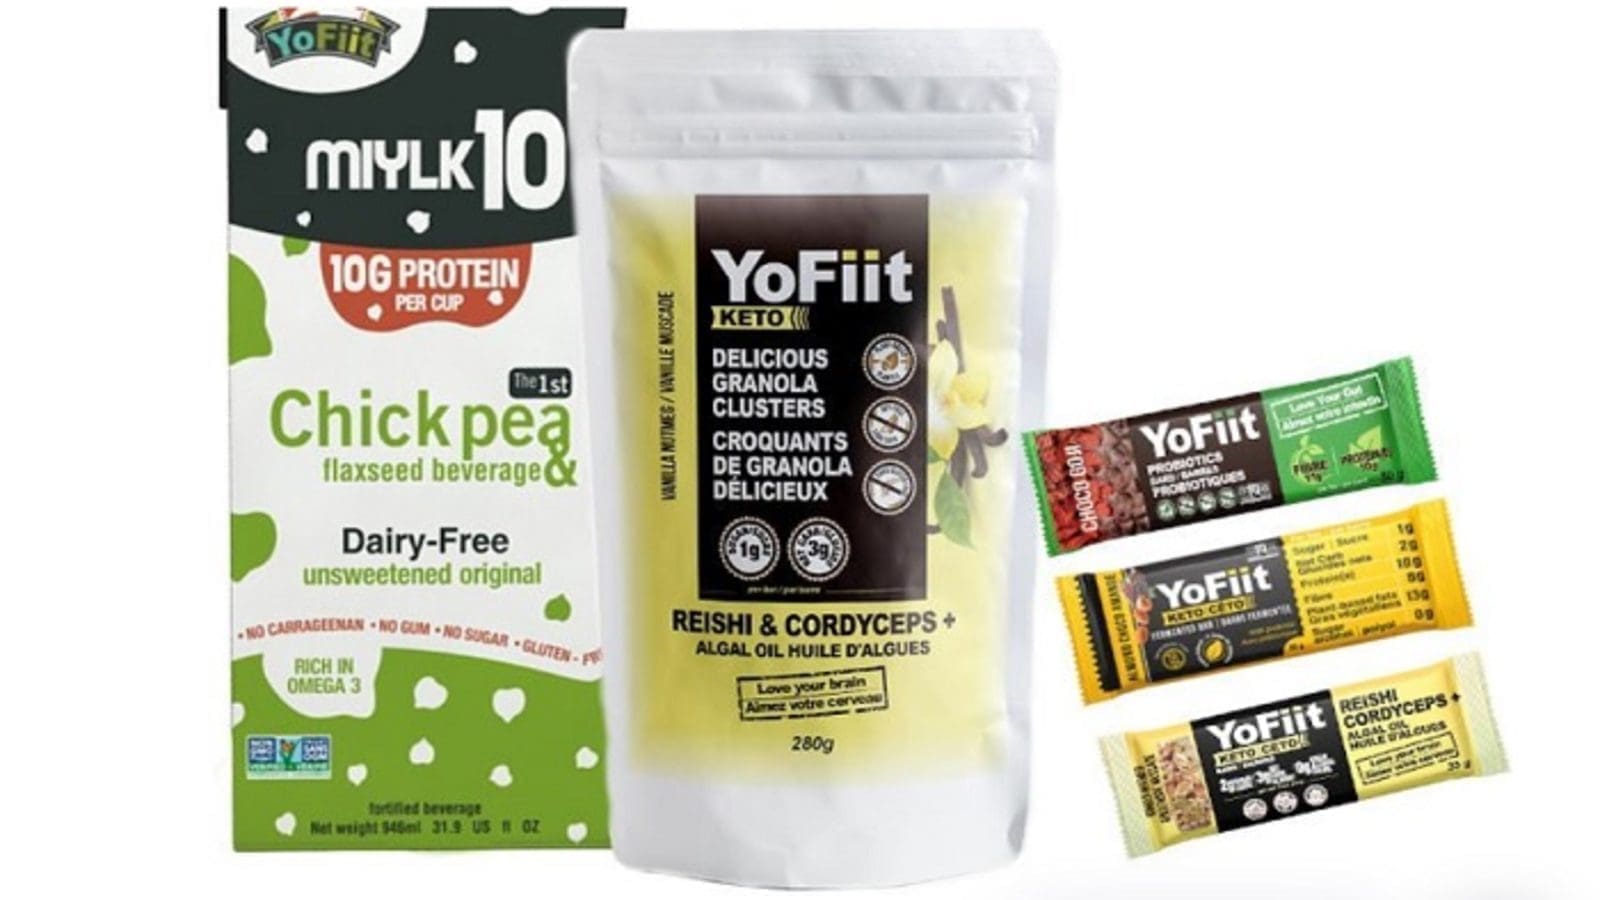 Canadian plant-based foods company GFI expands portfolio with acquisition of alternative dairy brand YoFiit 